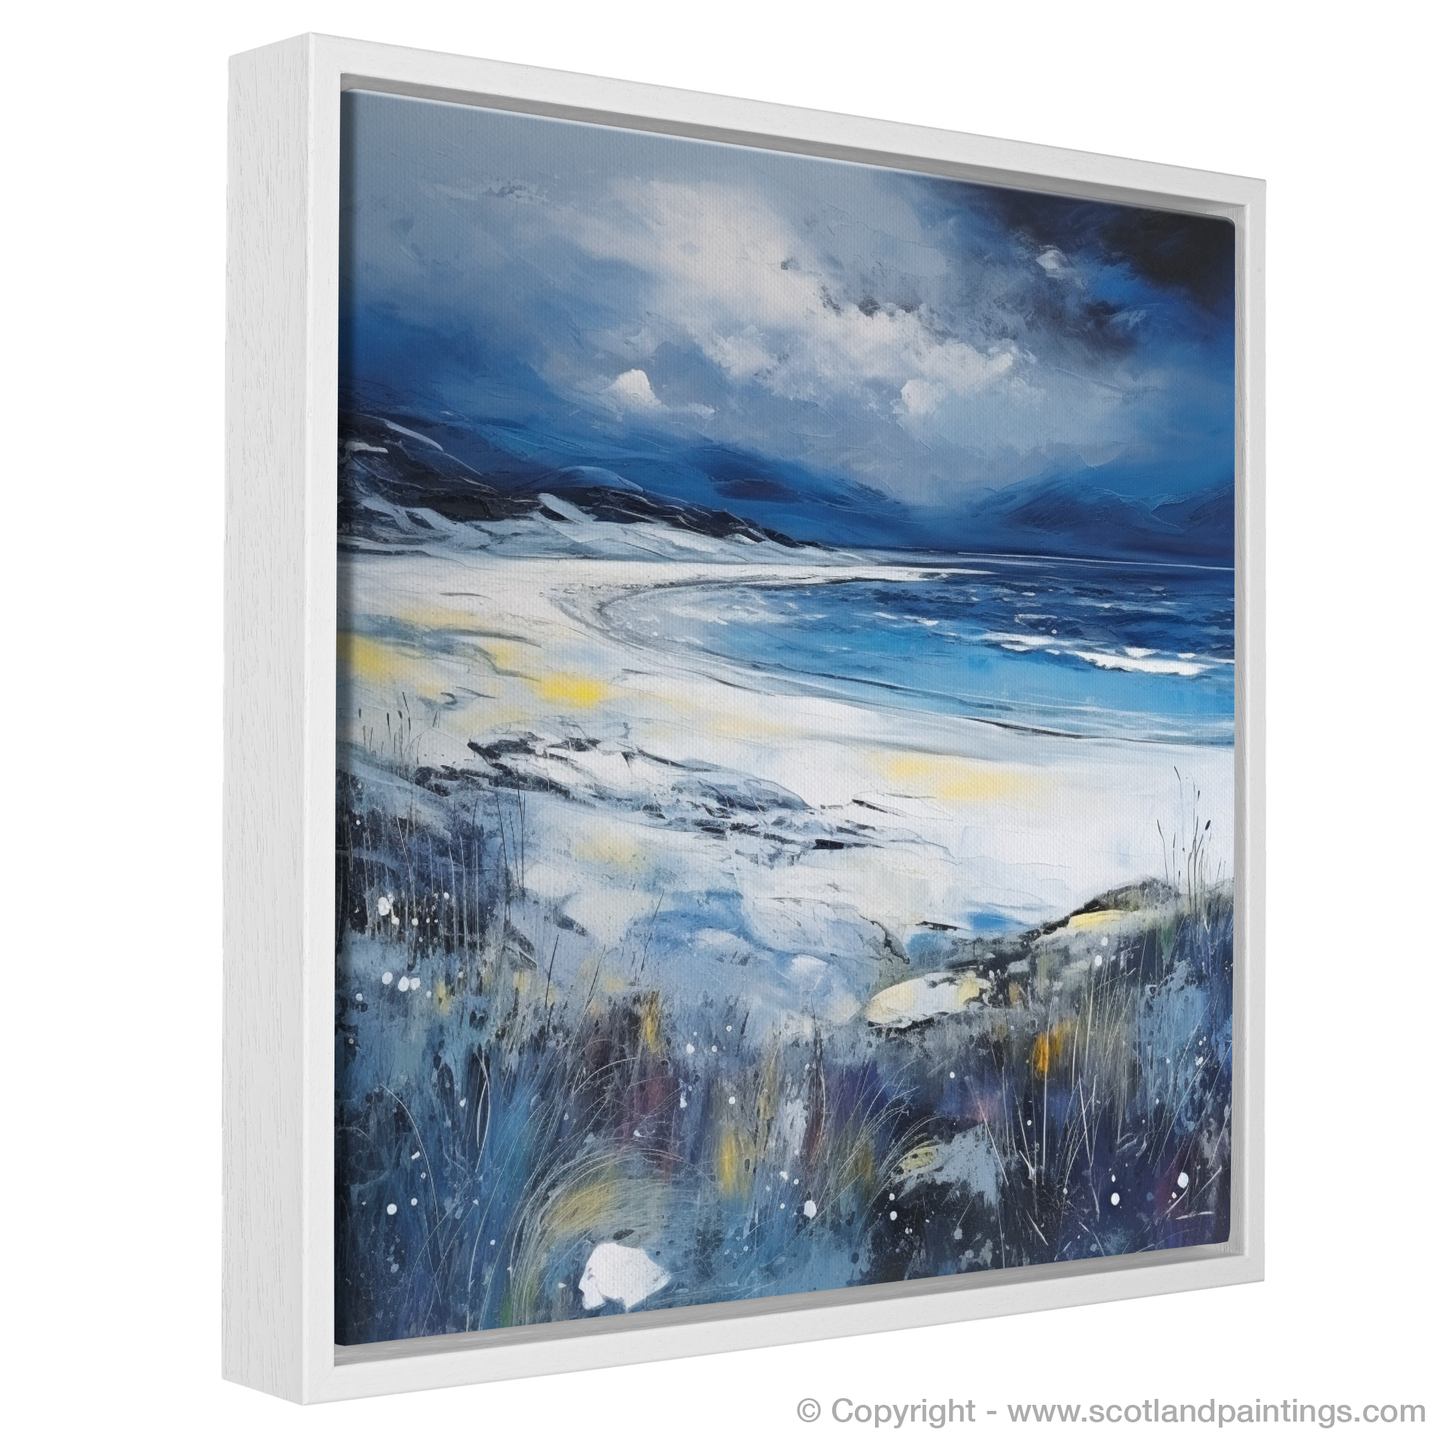 Storm's Embrace: Camusdarach Beach in Abstract Expressionism